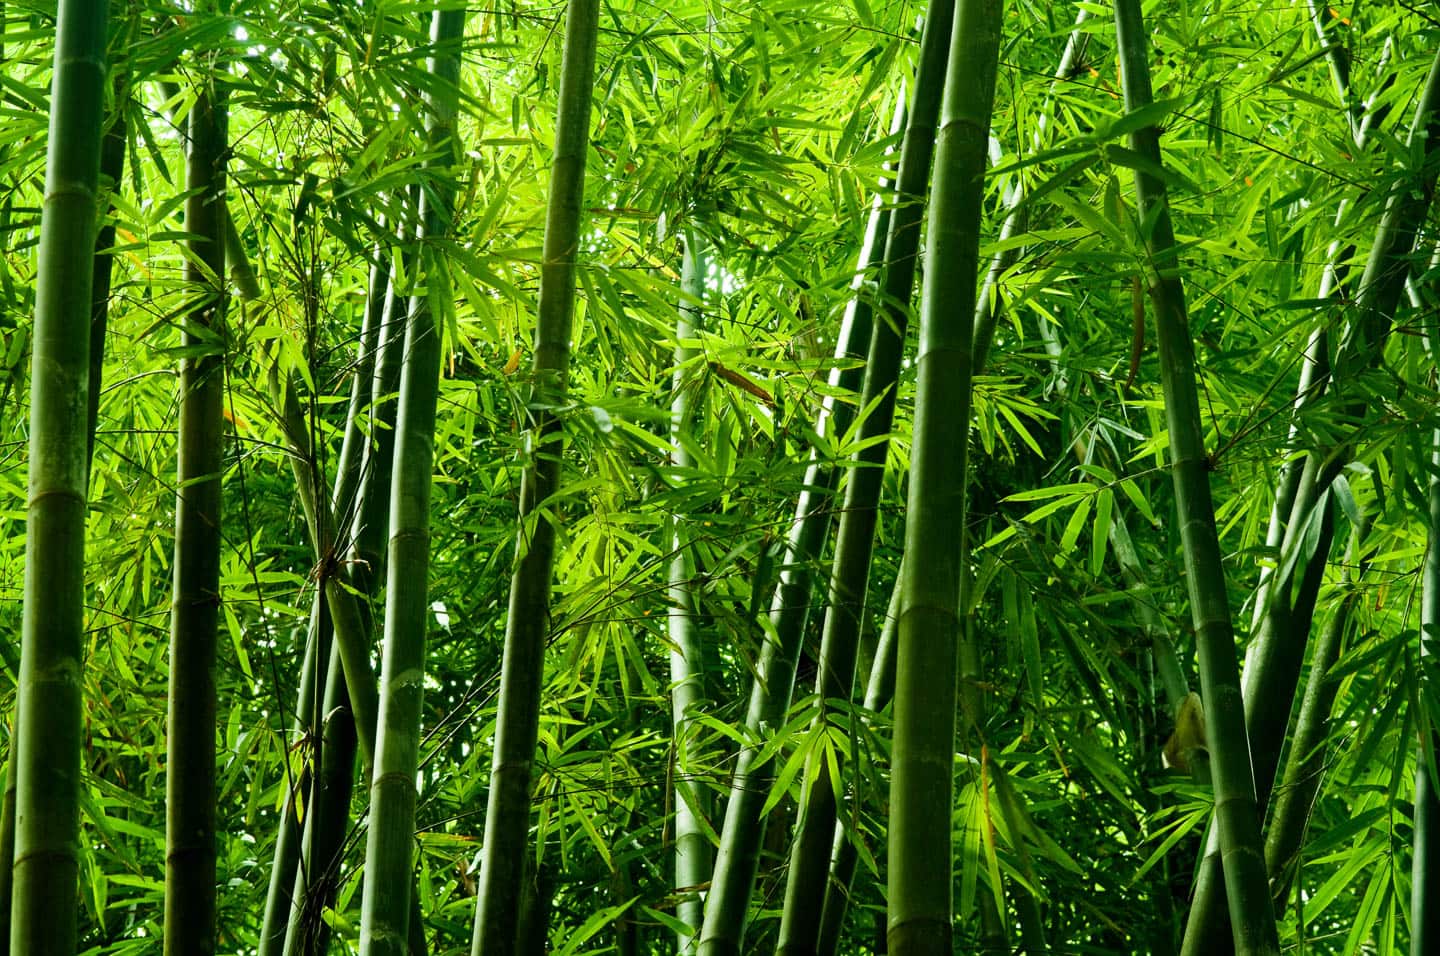 Bamboo growing in a tropical forest